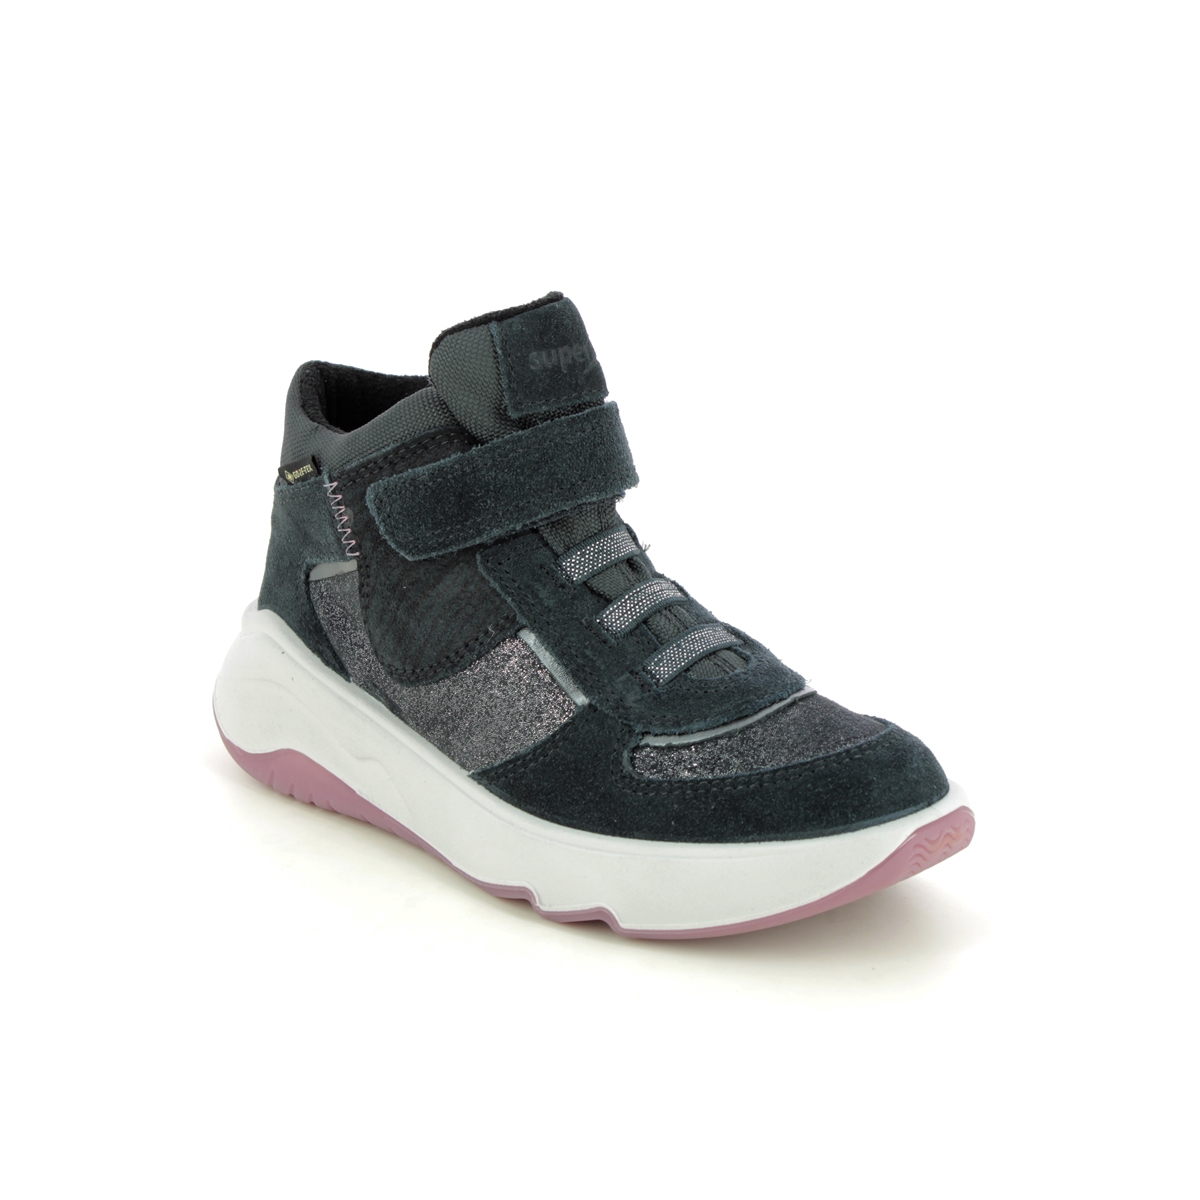 Superfit Melodie Ht Gtx Black Suede Kids Girls Trainers 1000632-2000 In Size 30 In Plain Black Suede For kids